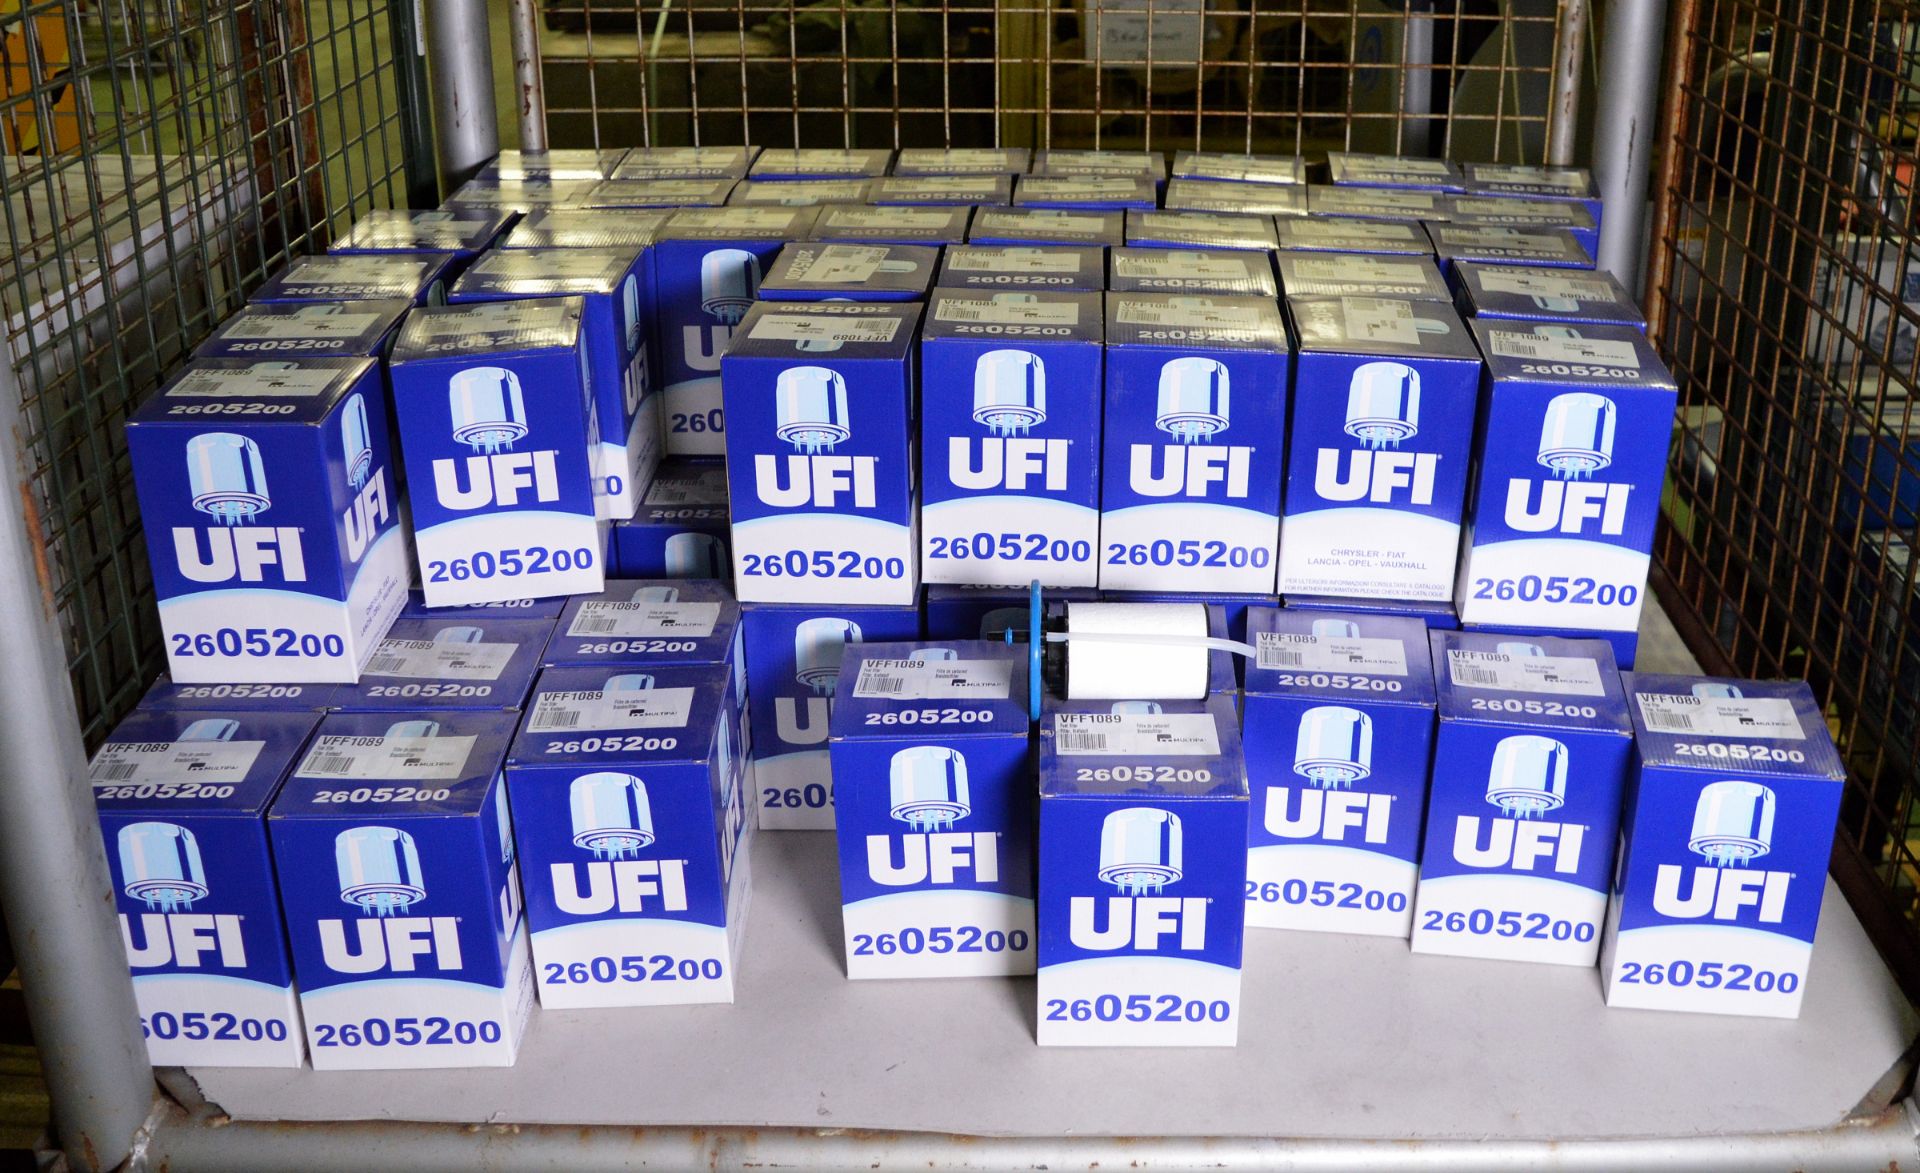 UFI fuel filters - 2605200 - approx 90